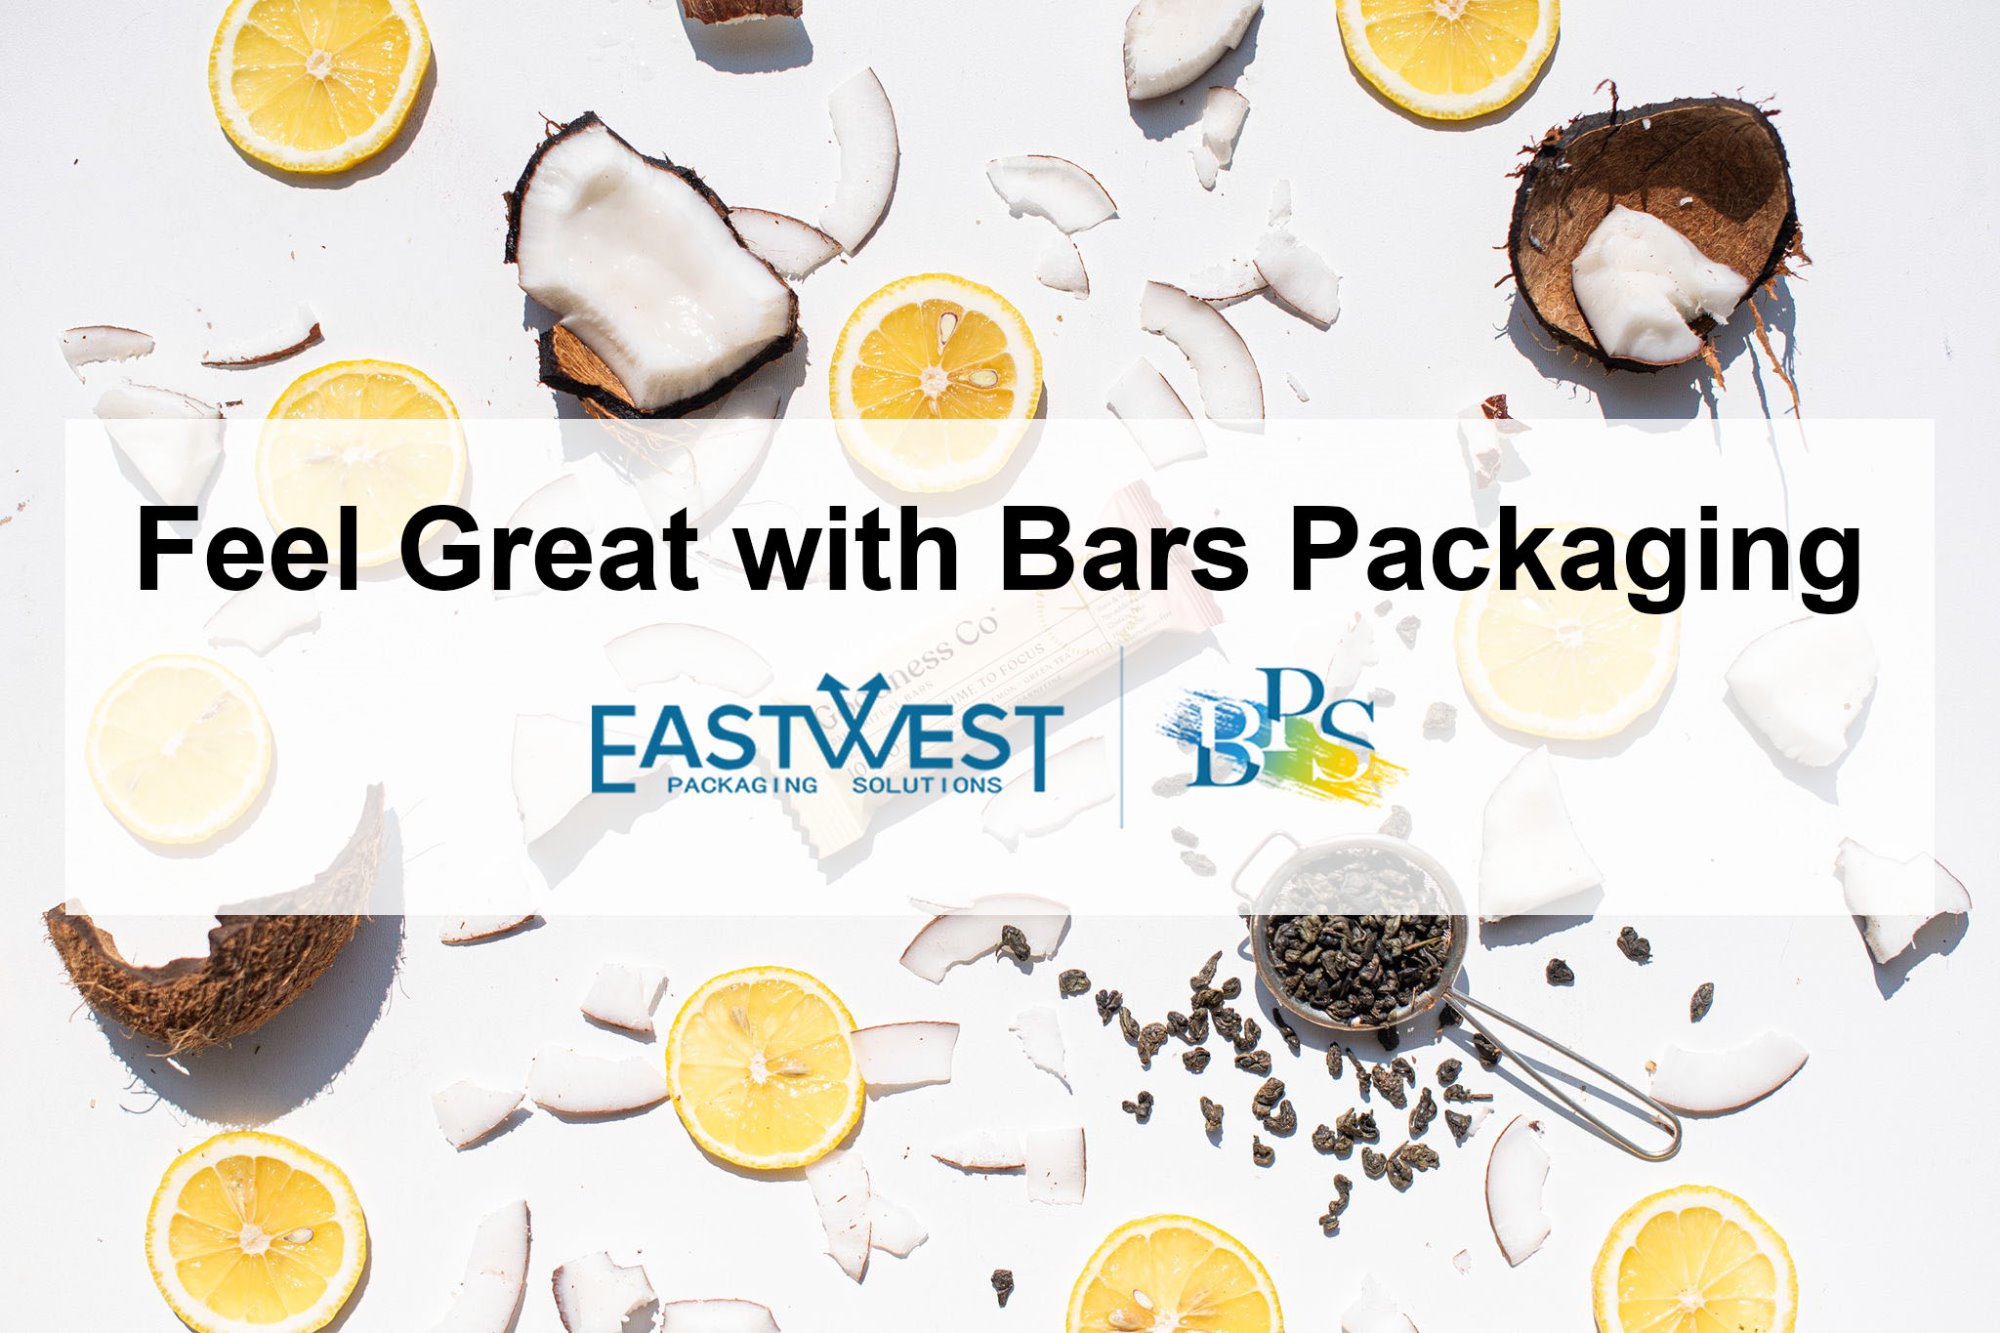 Feel Great with Bars Packaging